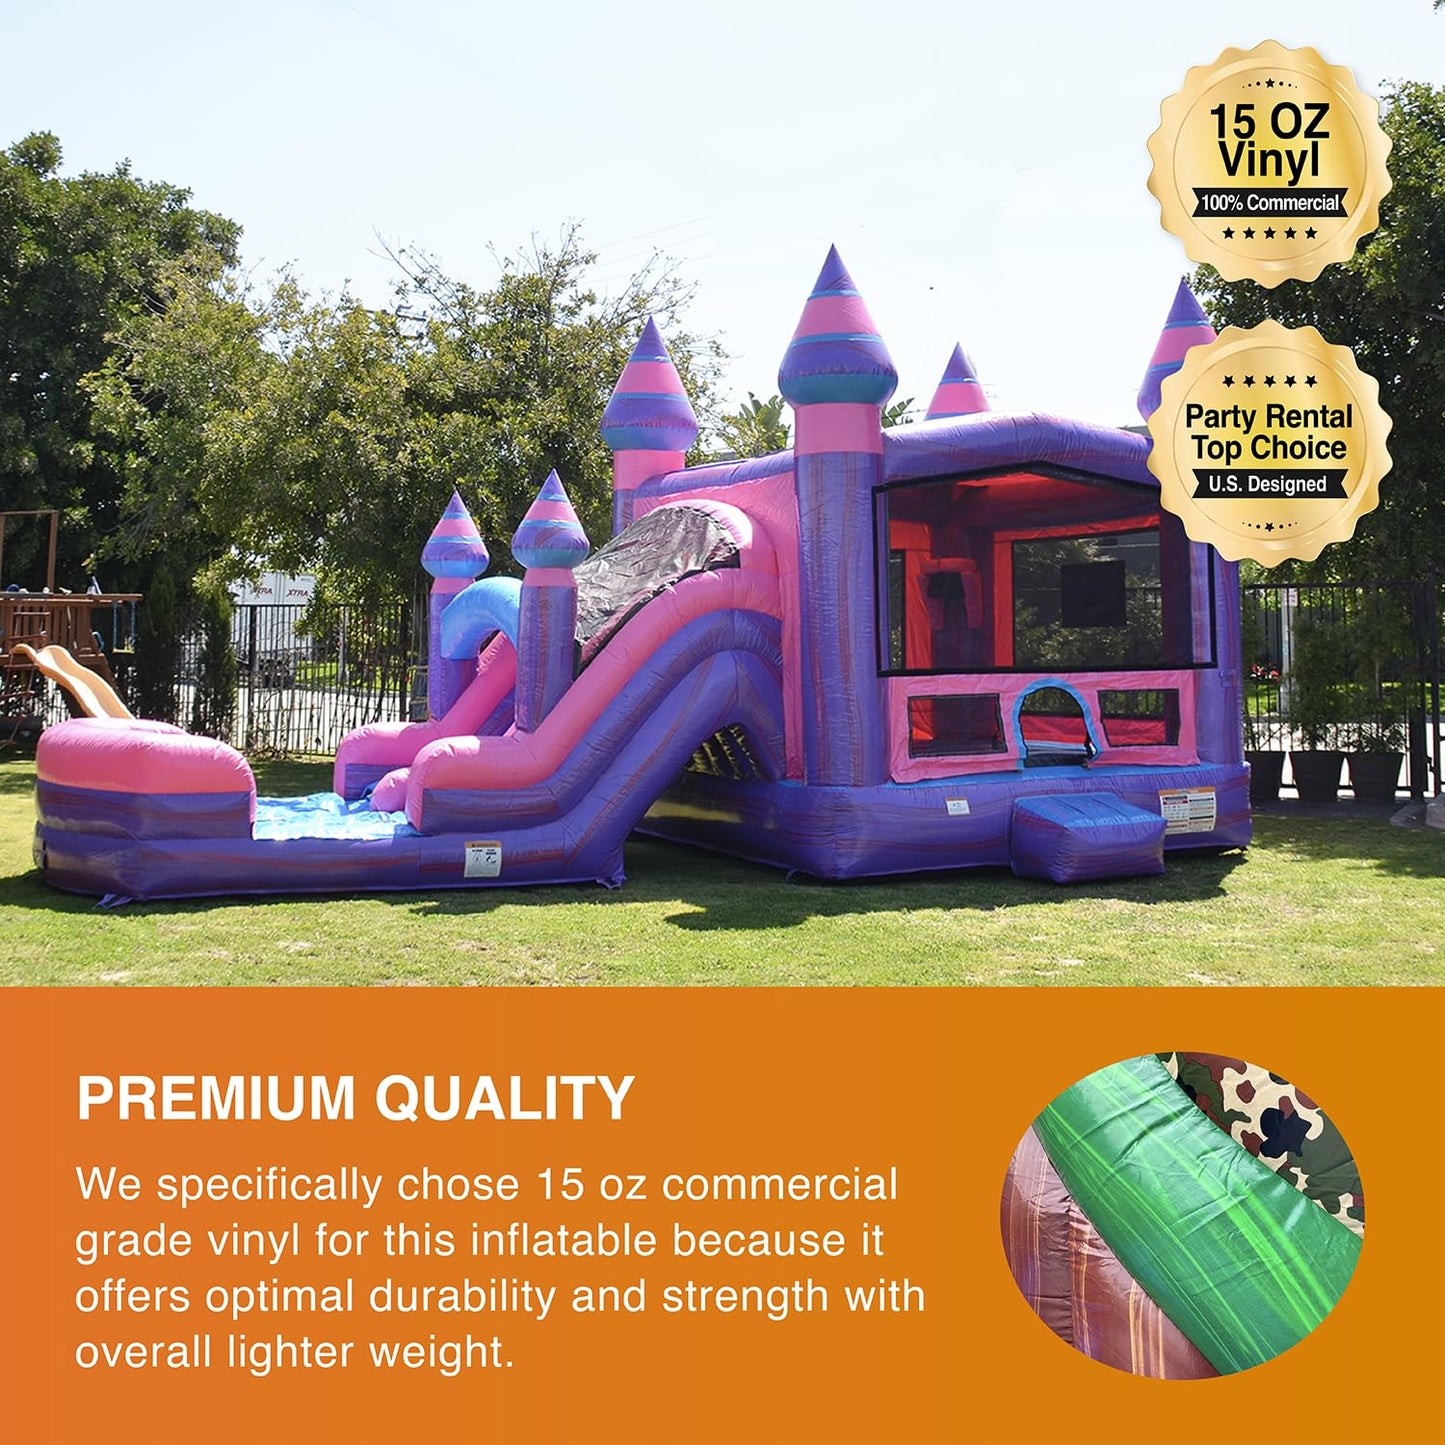 JumpOrange Purplish Commercial Grade Bounce House Water Slide Combo with Pool for Kids and Adults (with Blower), Basketball Hoop, Wet Dry Use, Outdoor Indoor, Birthday Party, Rental Quality